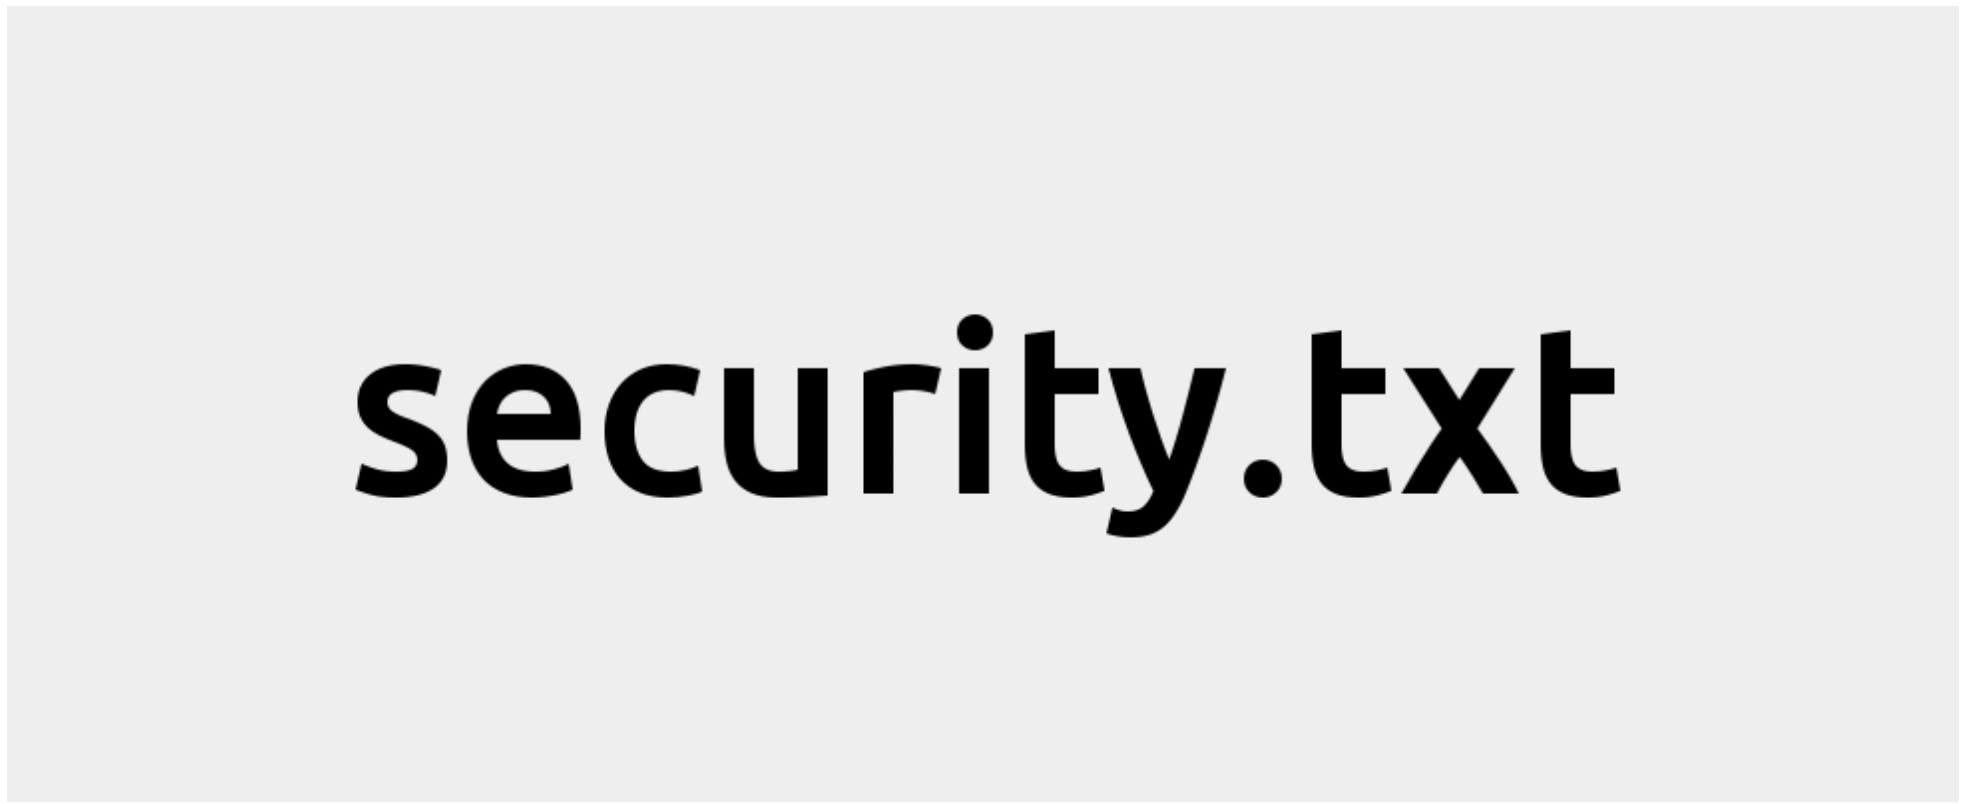 security.txt is a proposed standard for websites to define security policies (github.com)